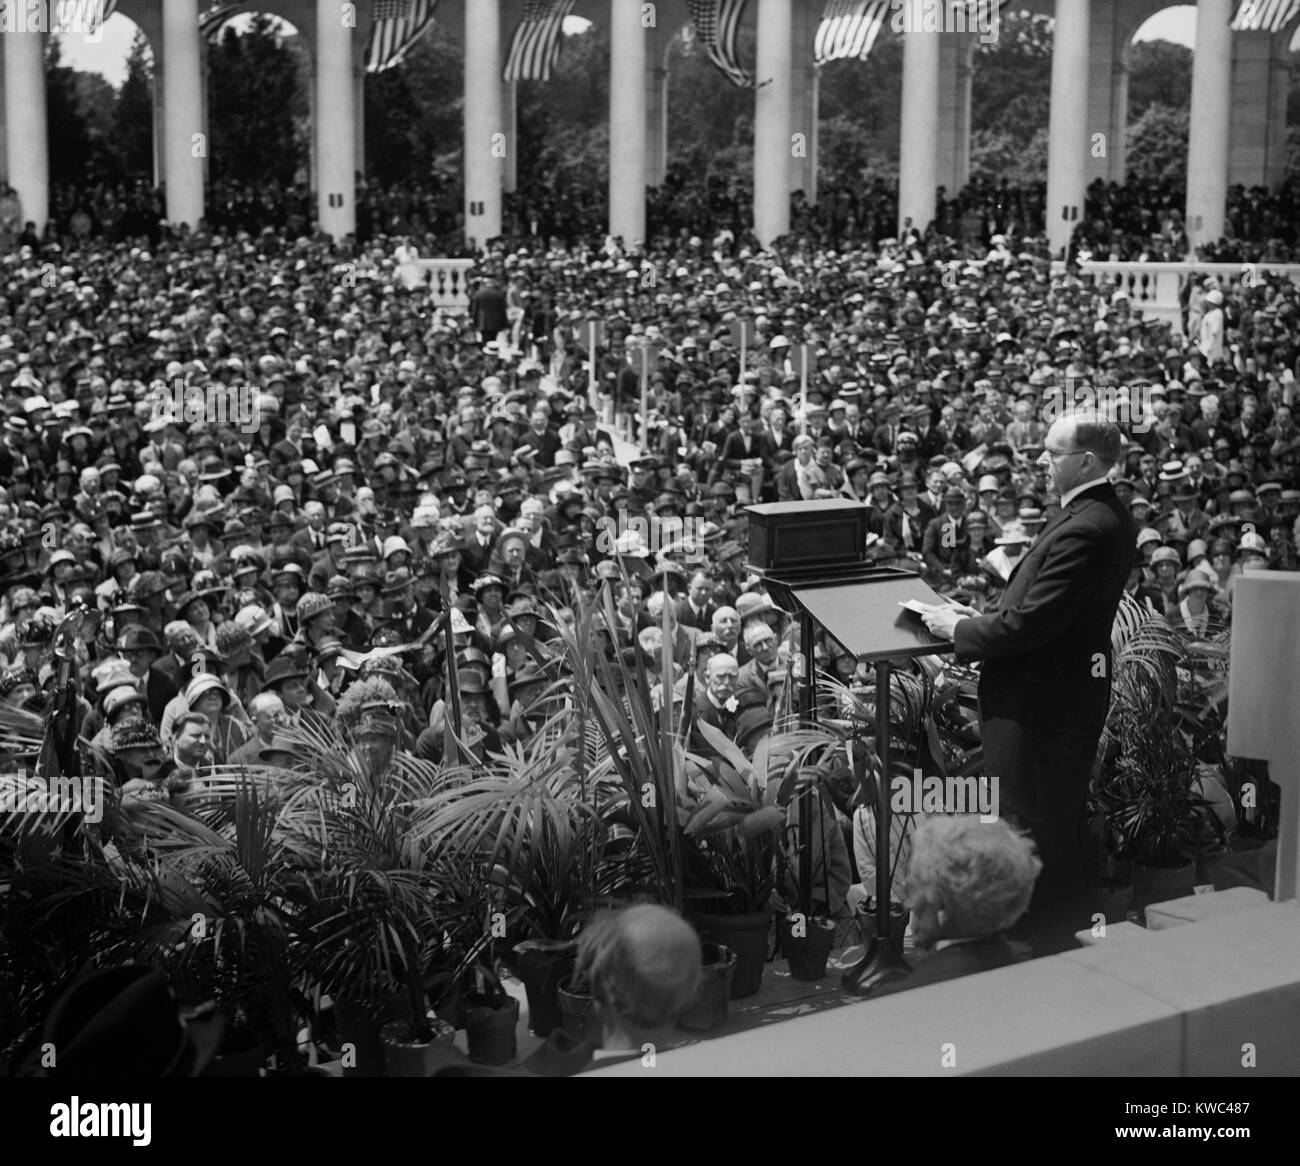 President Calvin Coolidge delivering Memorial Address at Arlington Amphitheater. May 30, 1924. (BSLOC 2015 15 125) Stock Photo